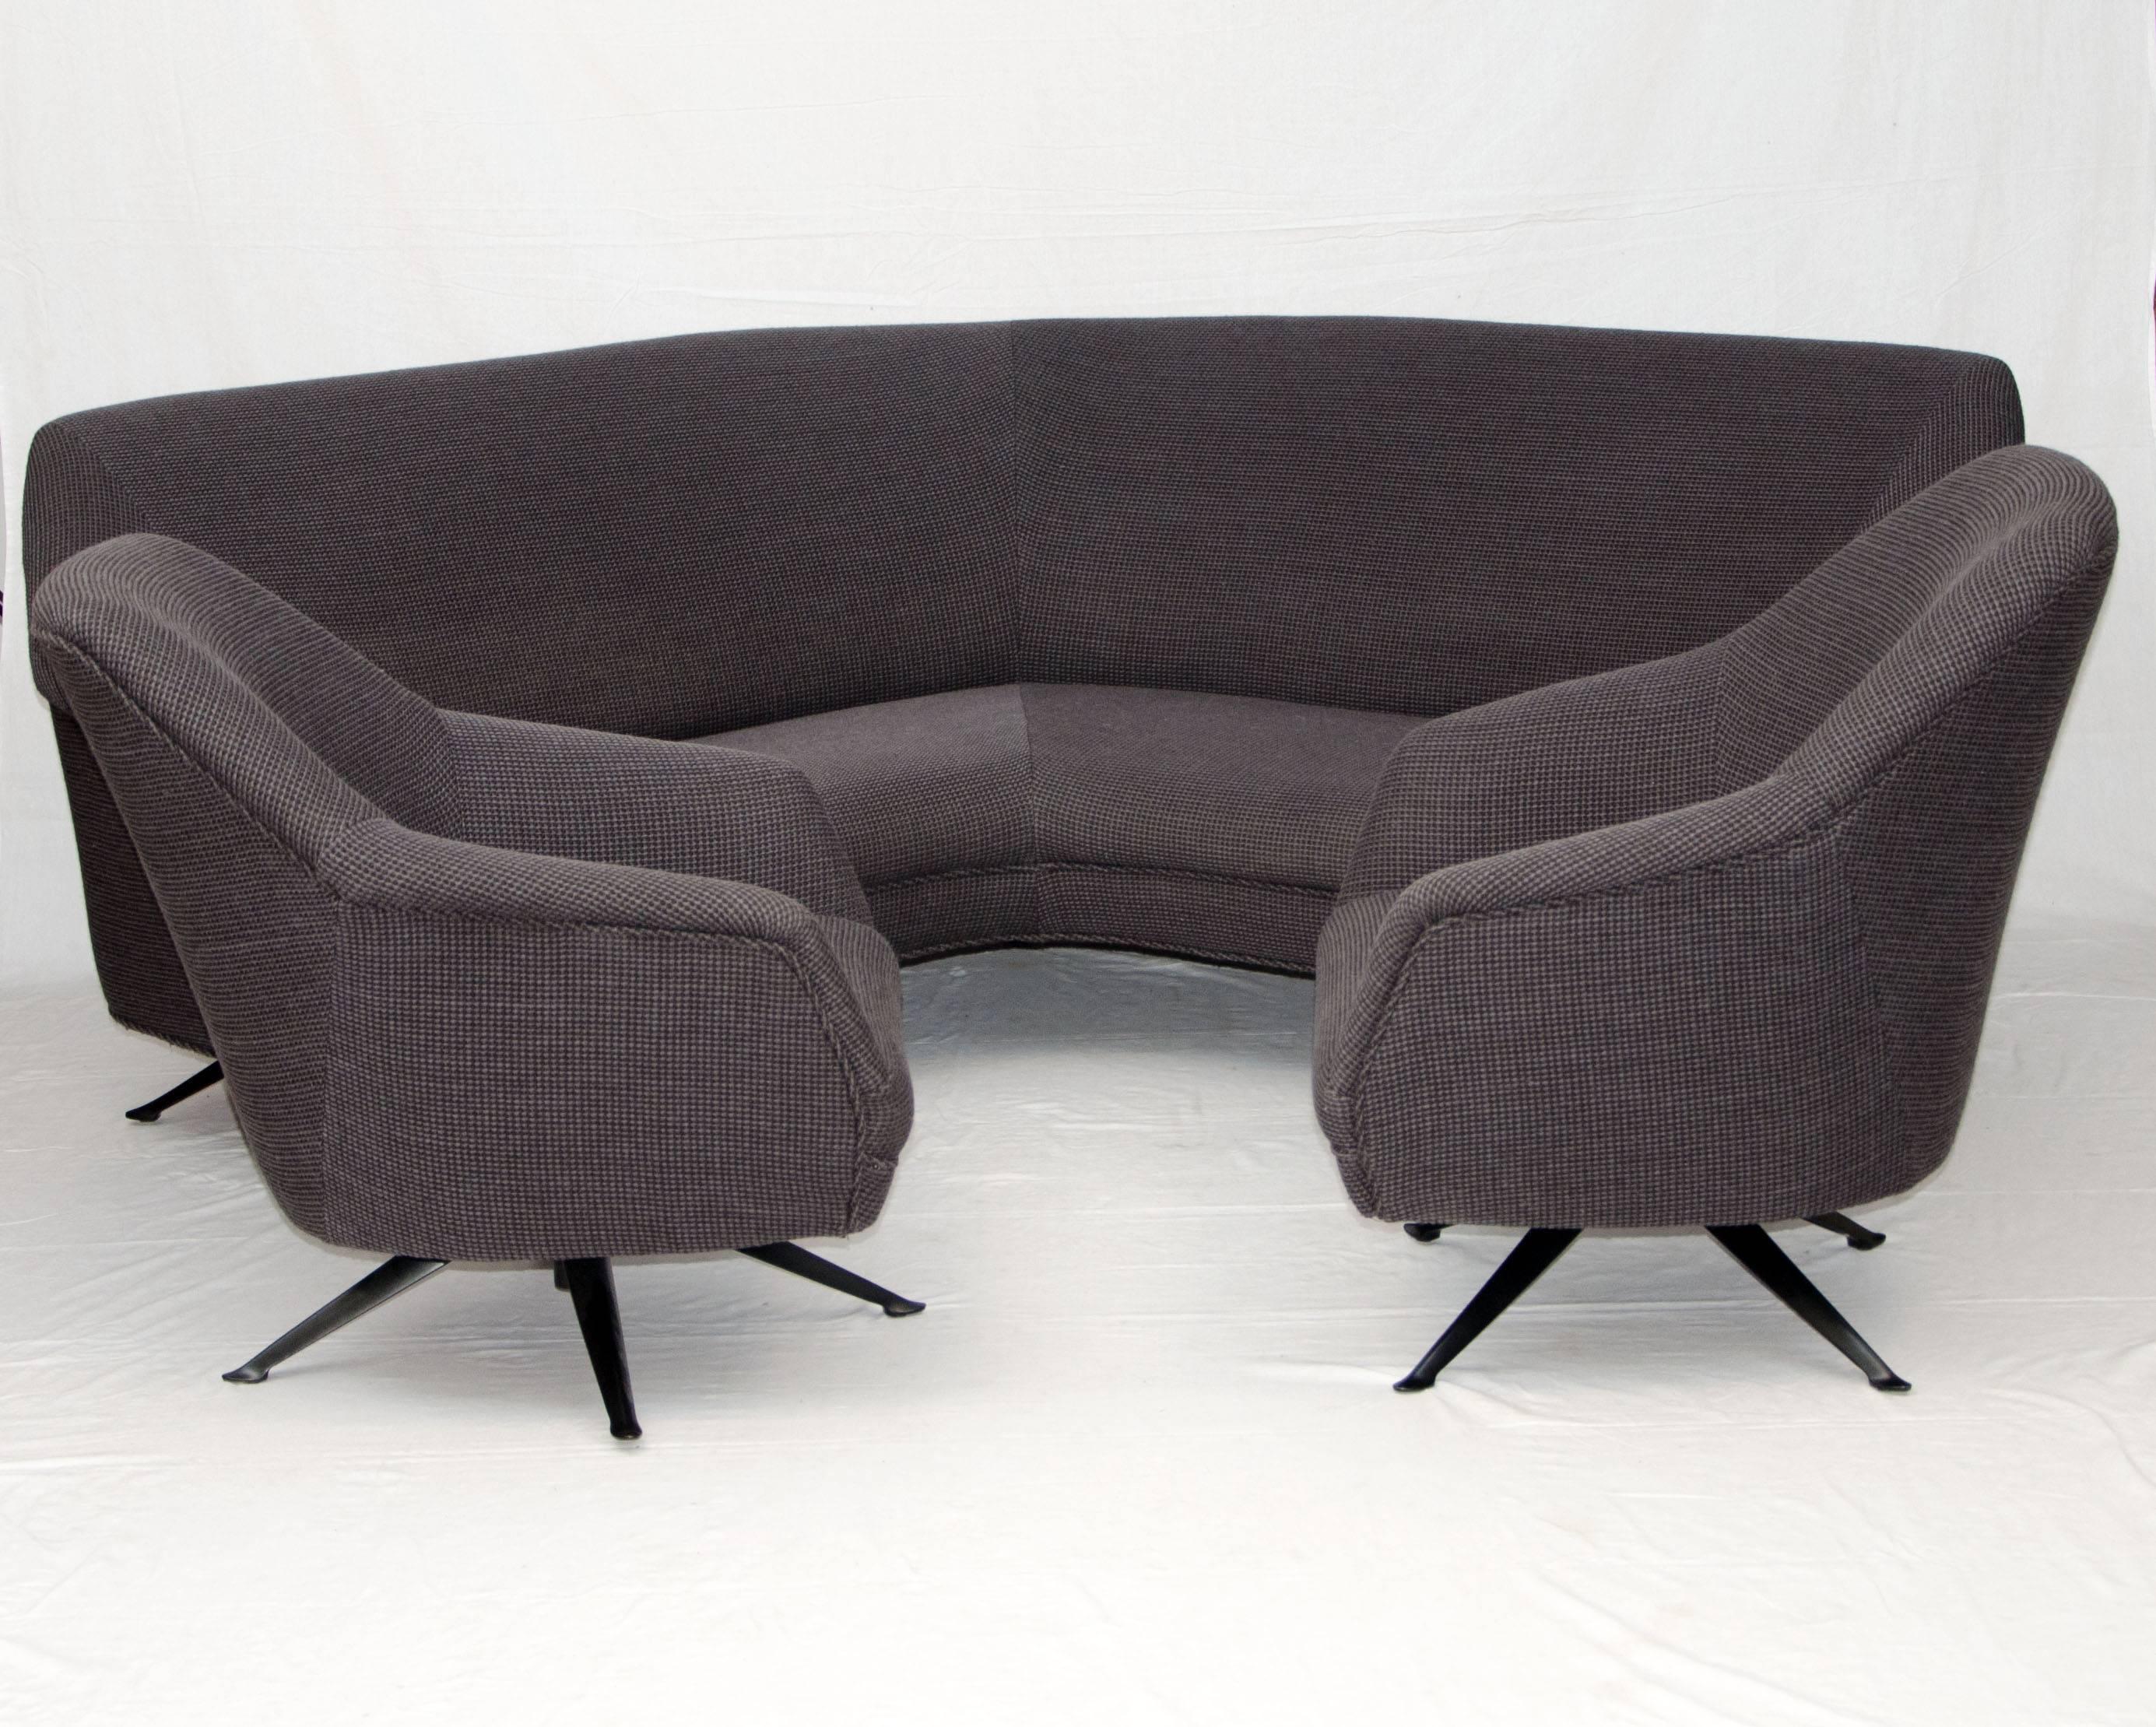 Powder-Coated Pair of Italian Swiveling Lounge Chairs, Knoll Fabric, Attributed to Gio Ponti